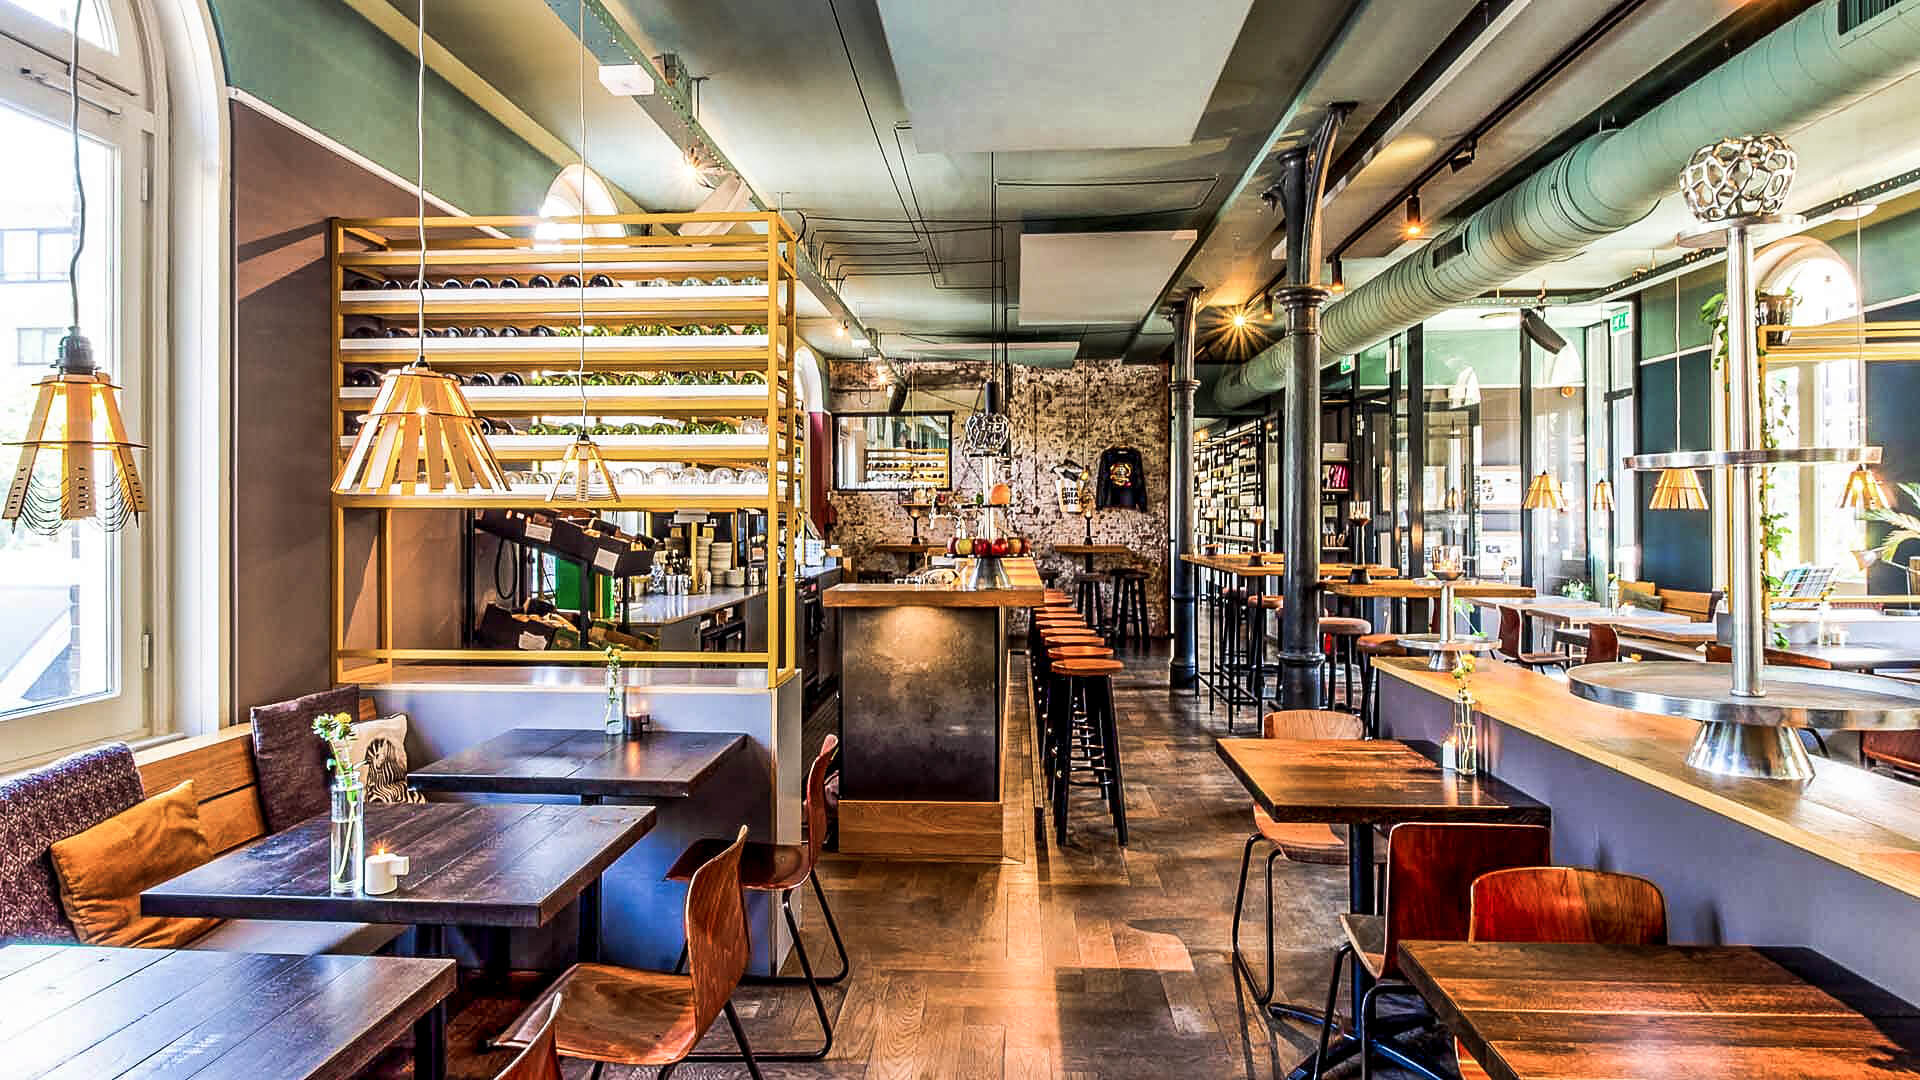 Amsterdam's trendy urban restaurant Instock focuses on cutting down on waste and zero waste